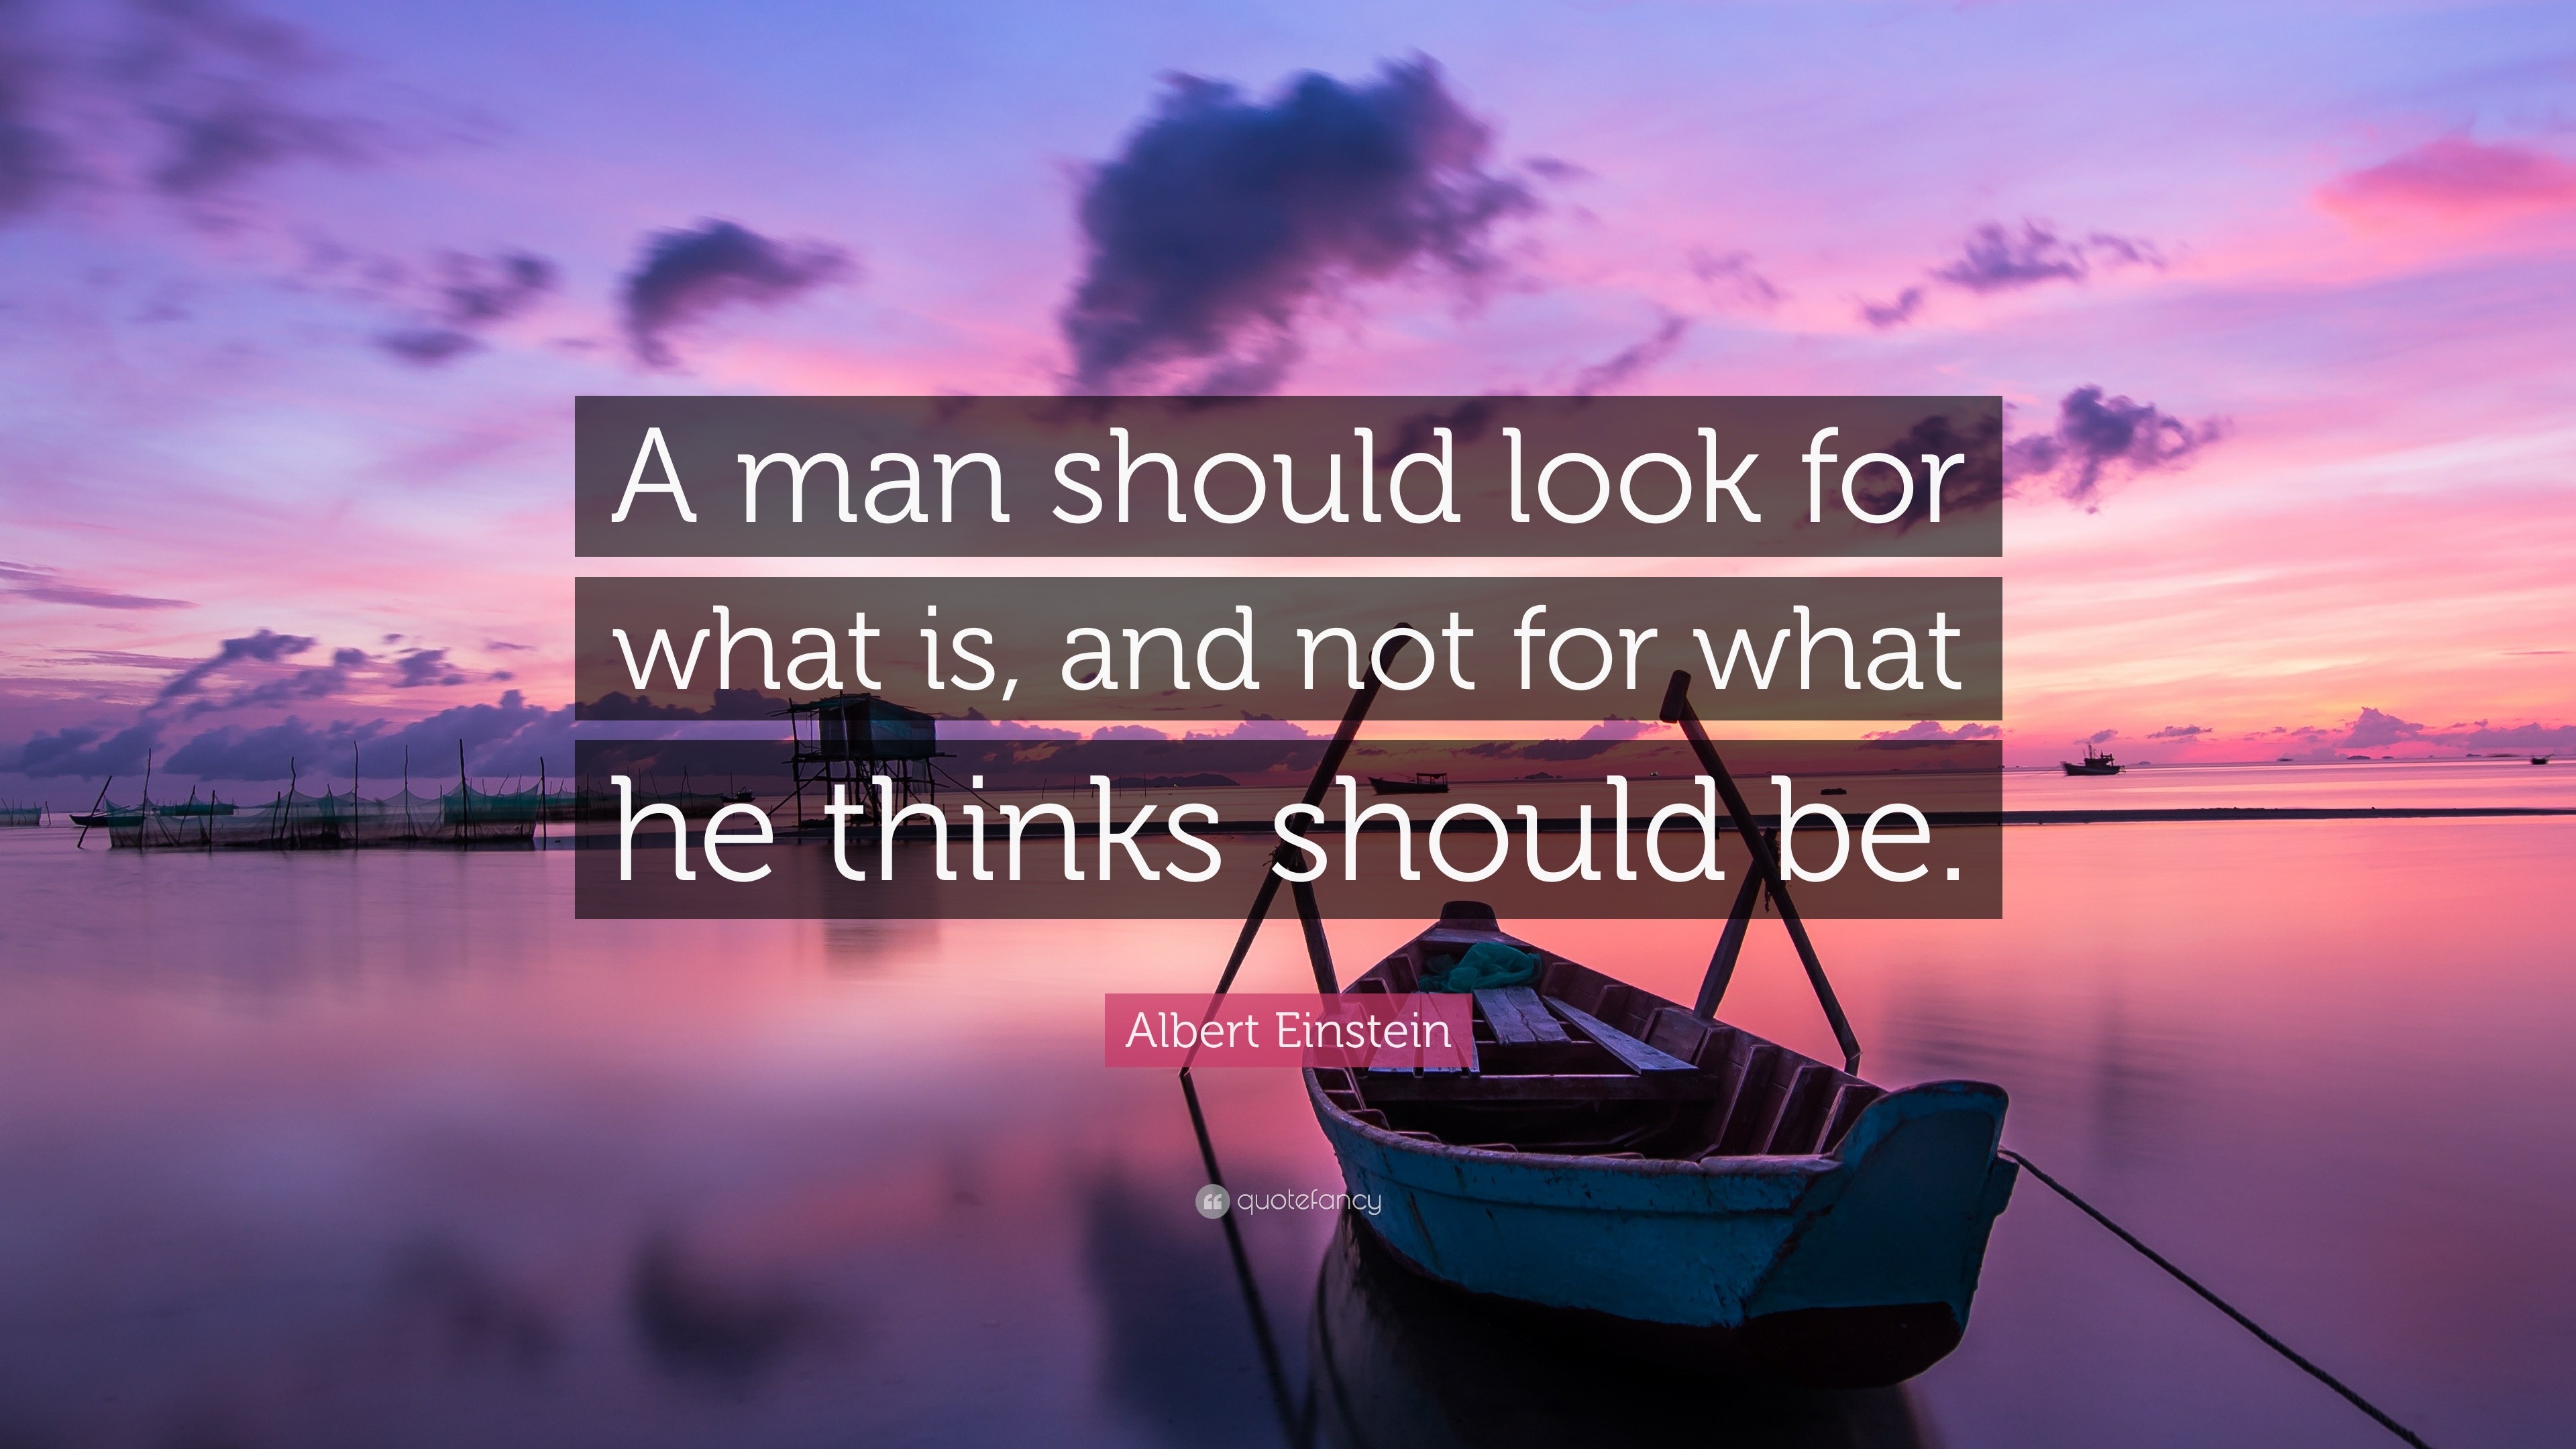 Albert Einstein Quote: “A man should look for what is, and not for what